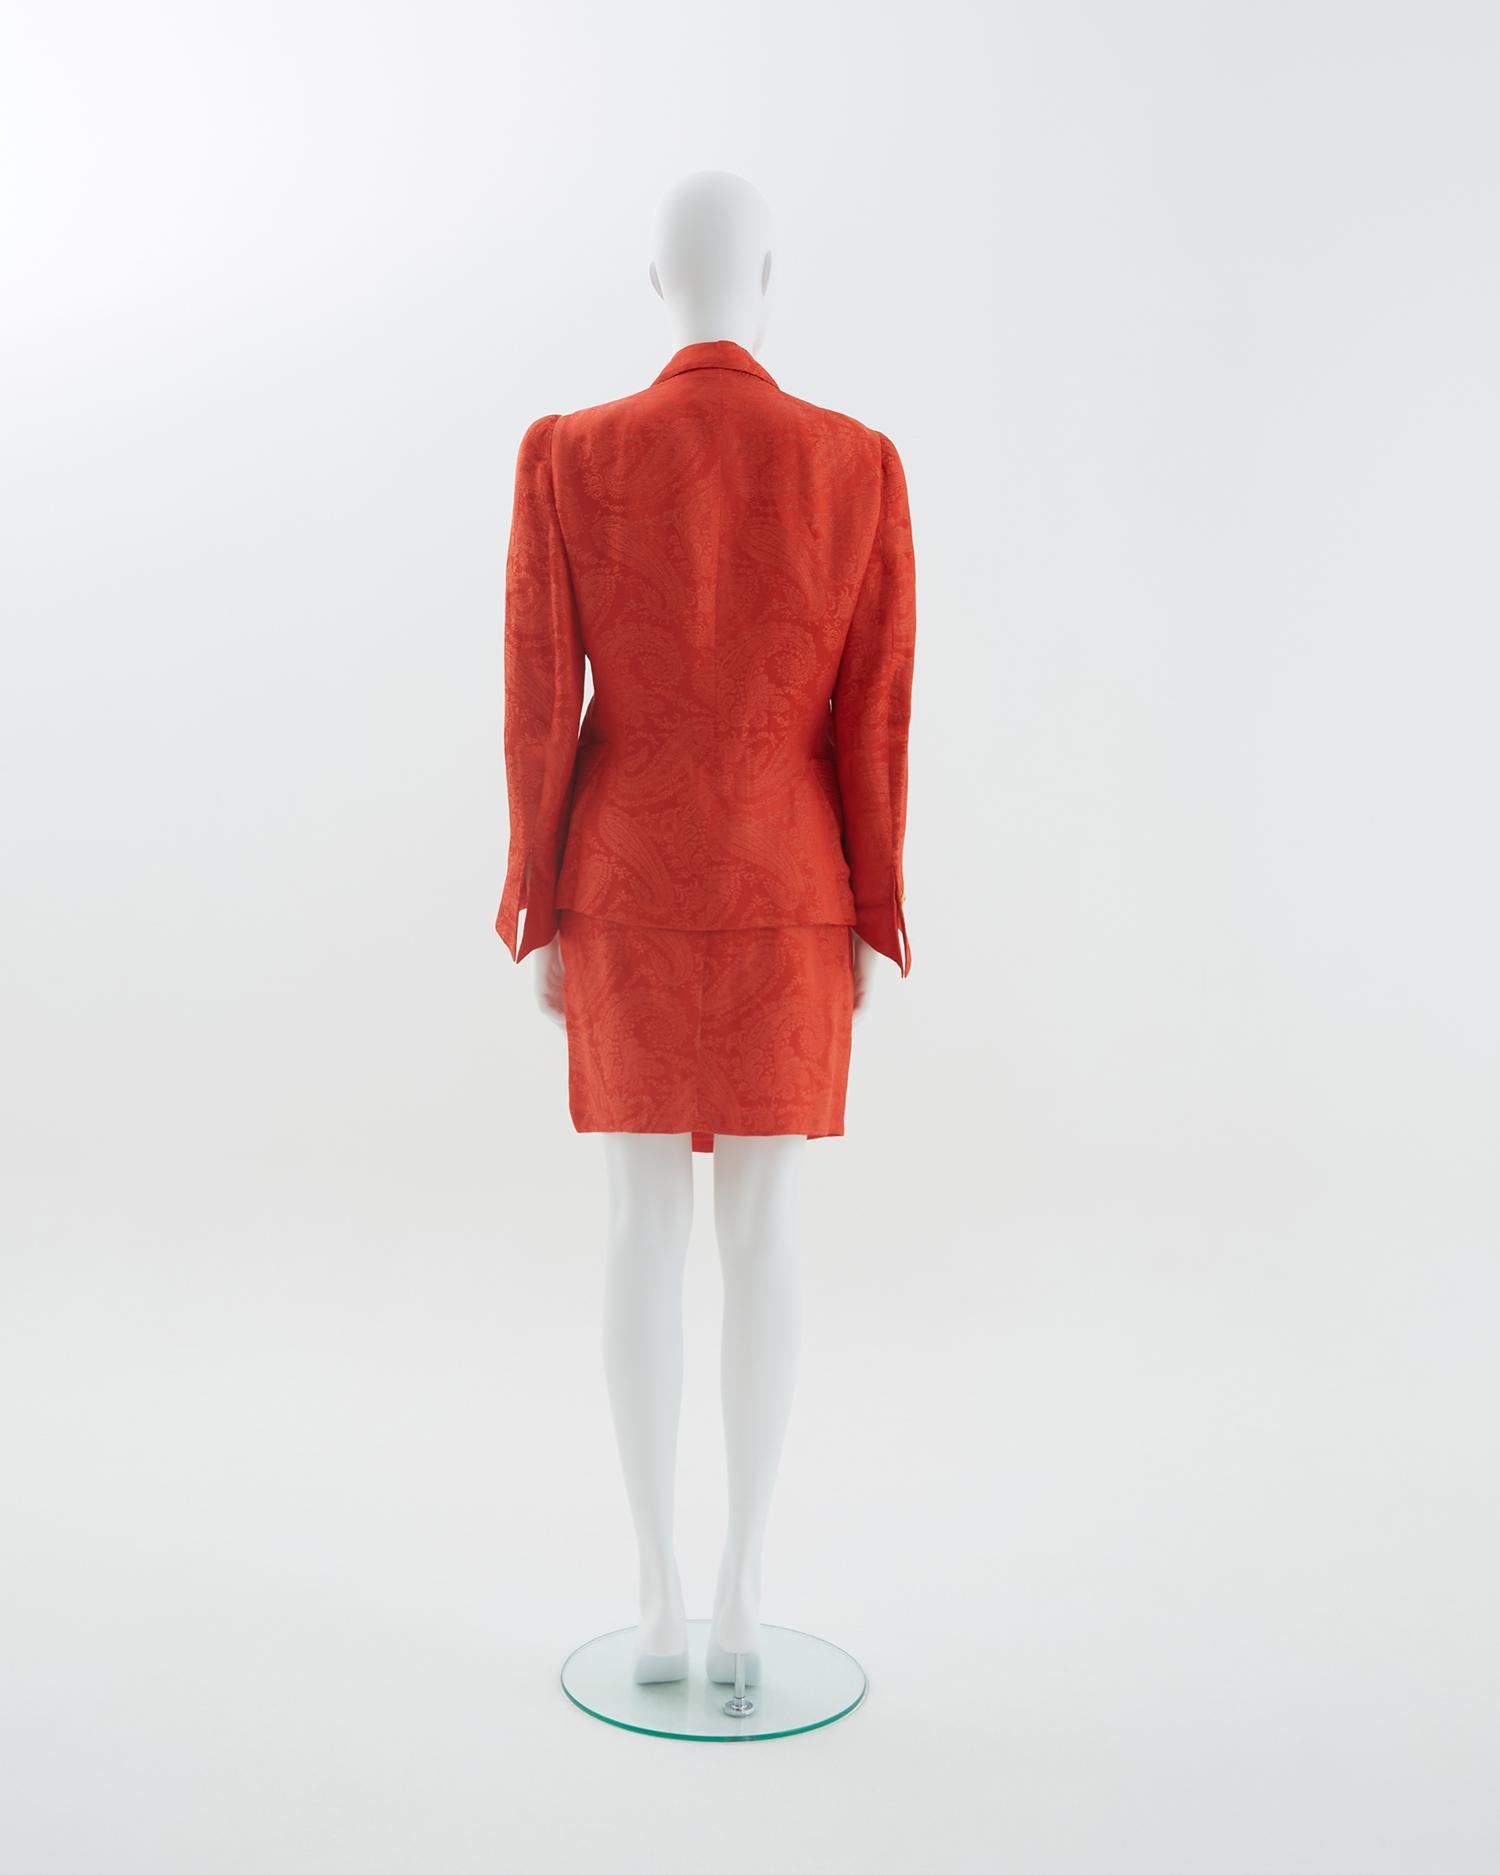 Gianni Versace S/S 1991 Orange silk paisley print blazer and skirt set In Good Condition For Sale In Milano, IT